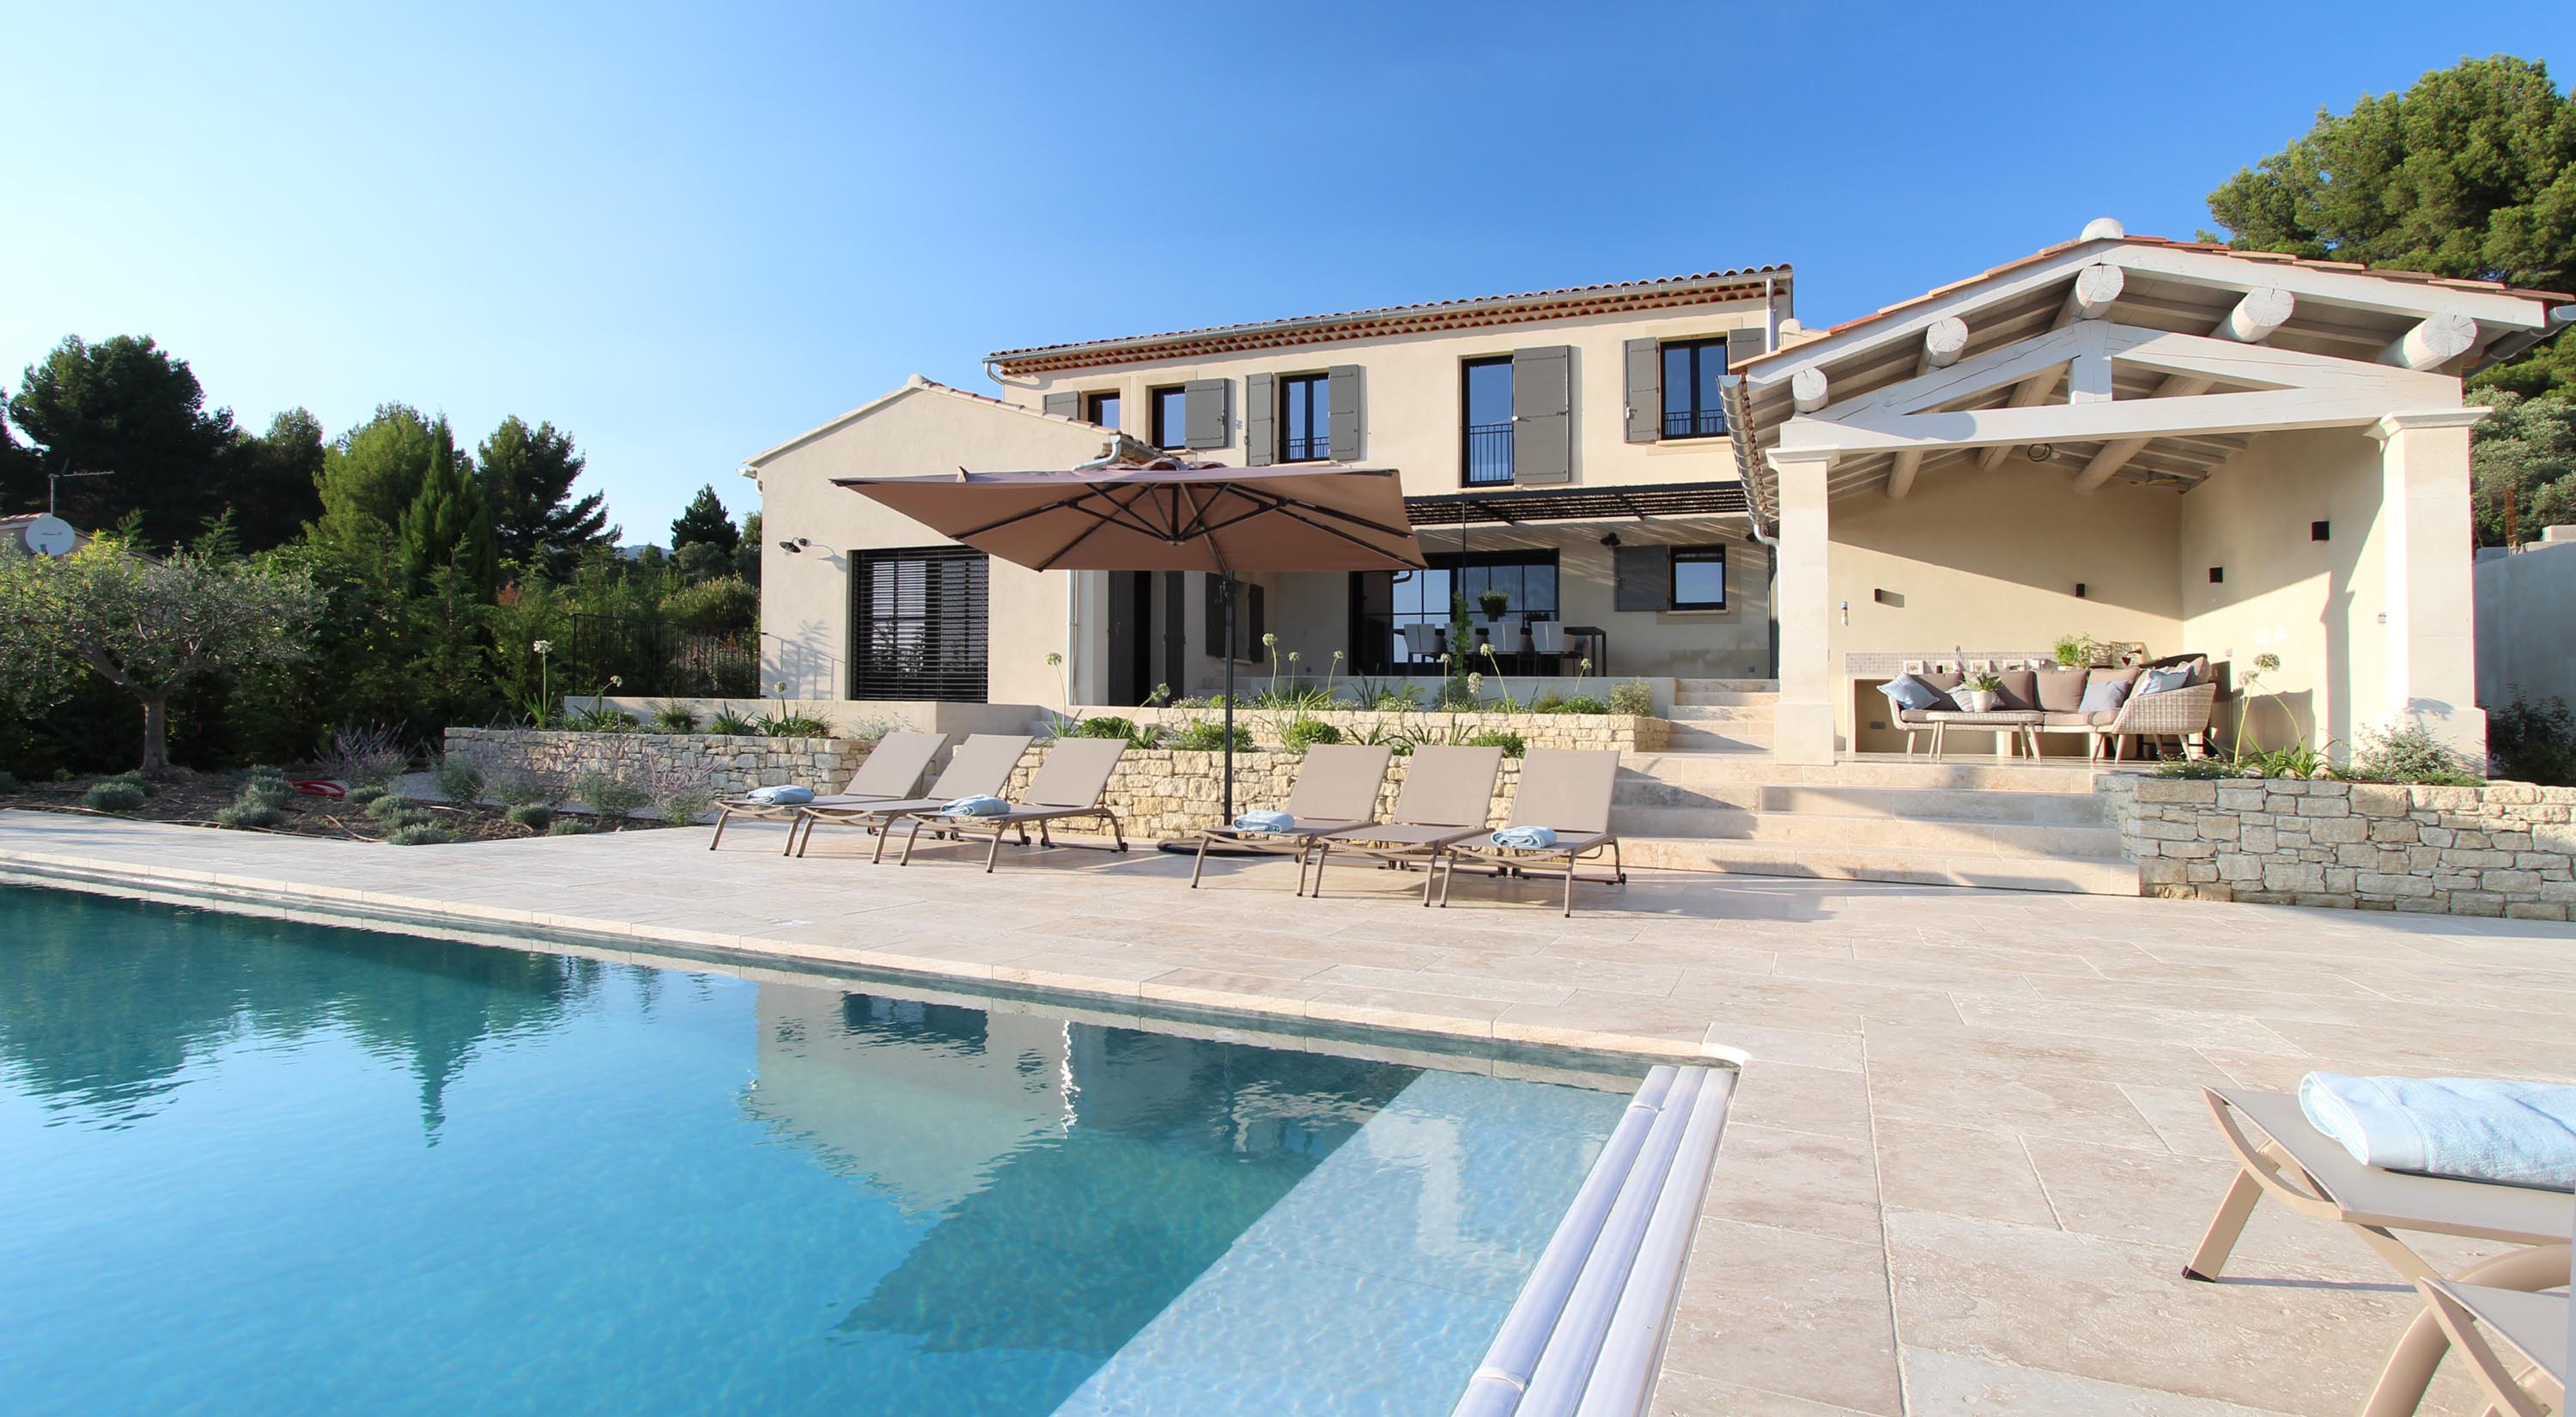 Luxury rental holiday villa in Provence 